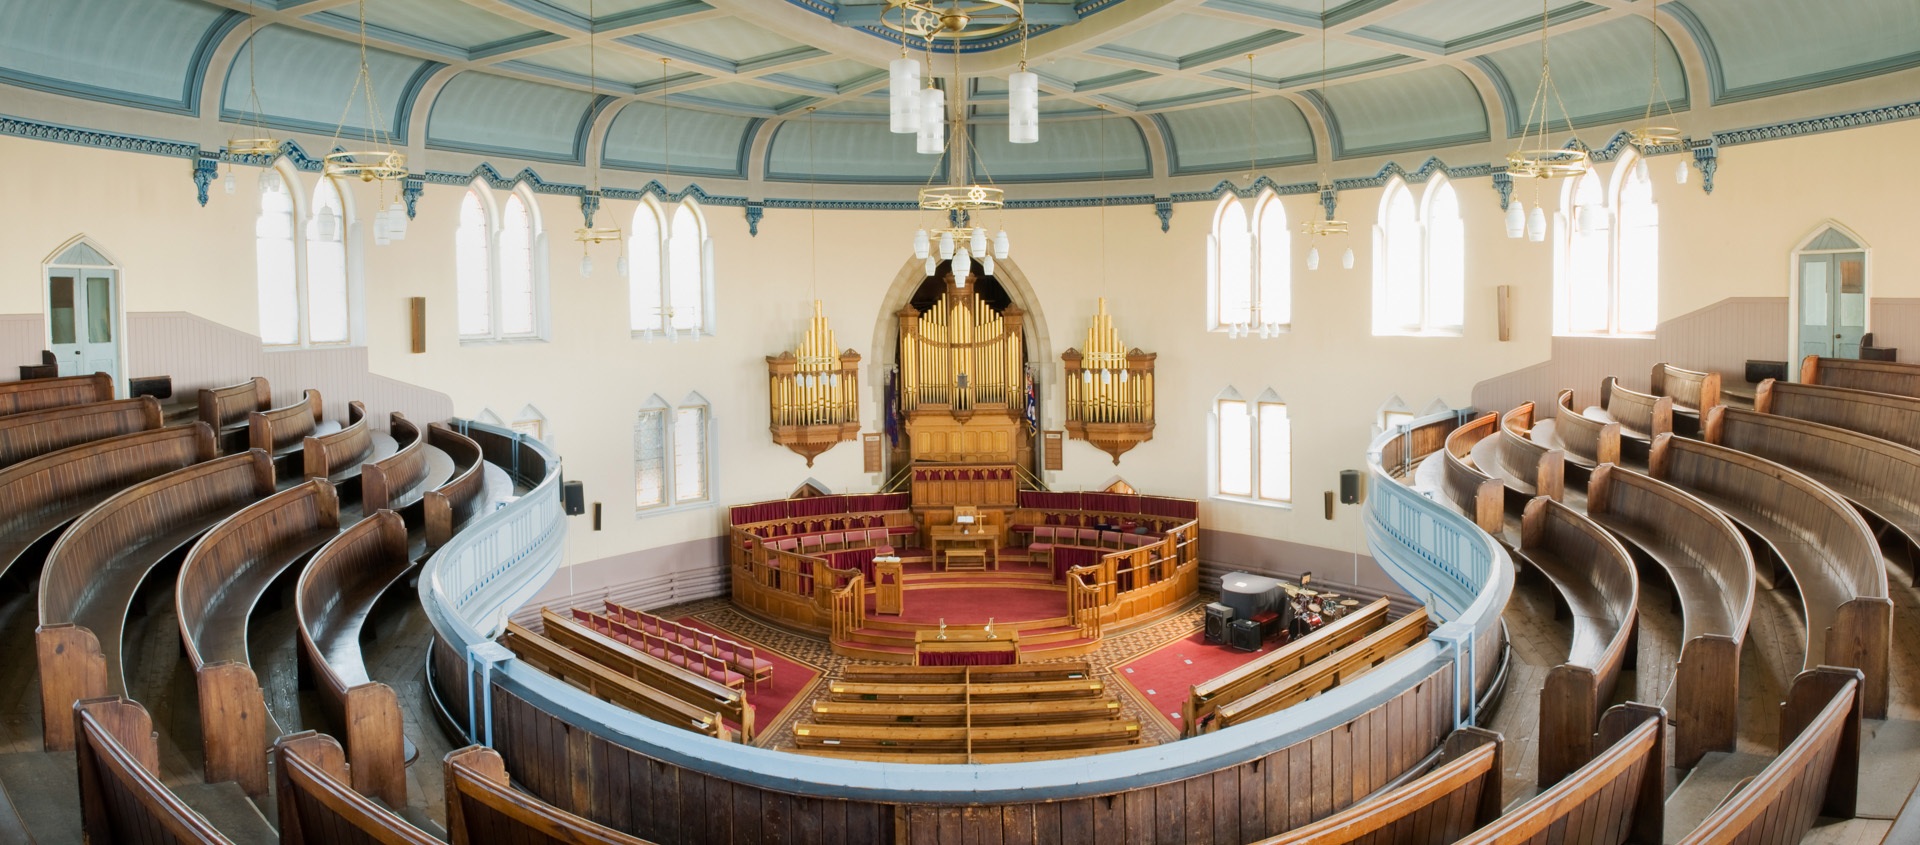 Interior, first floor, showing curved pews on first floor, straight pews on ground floor with organ pipes and central pulpit.